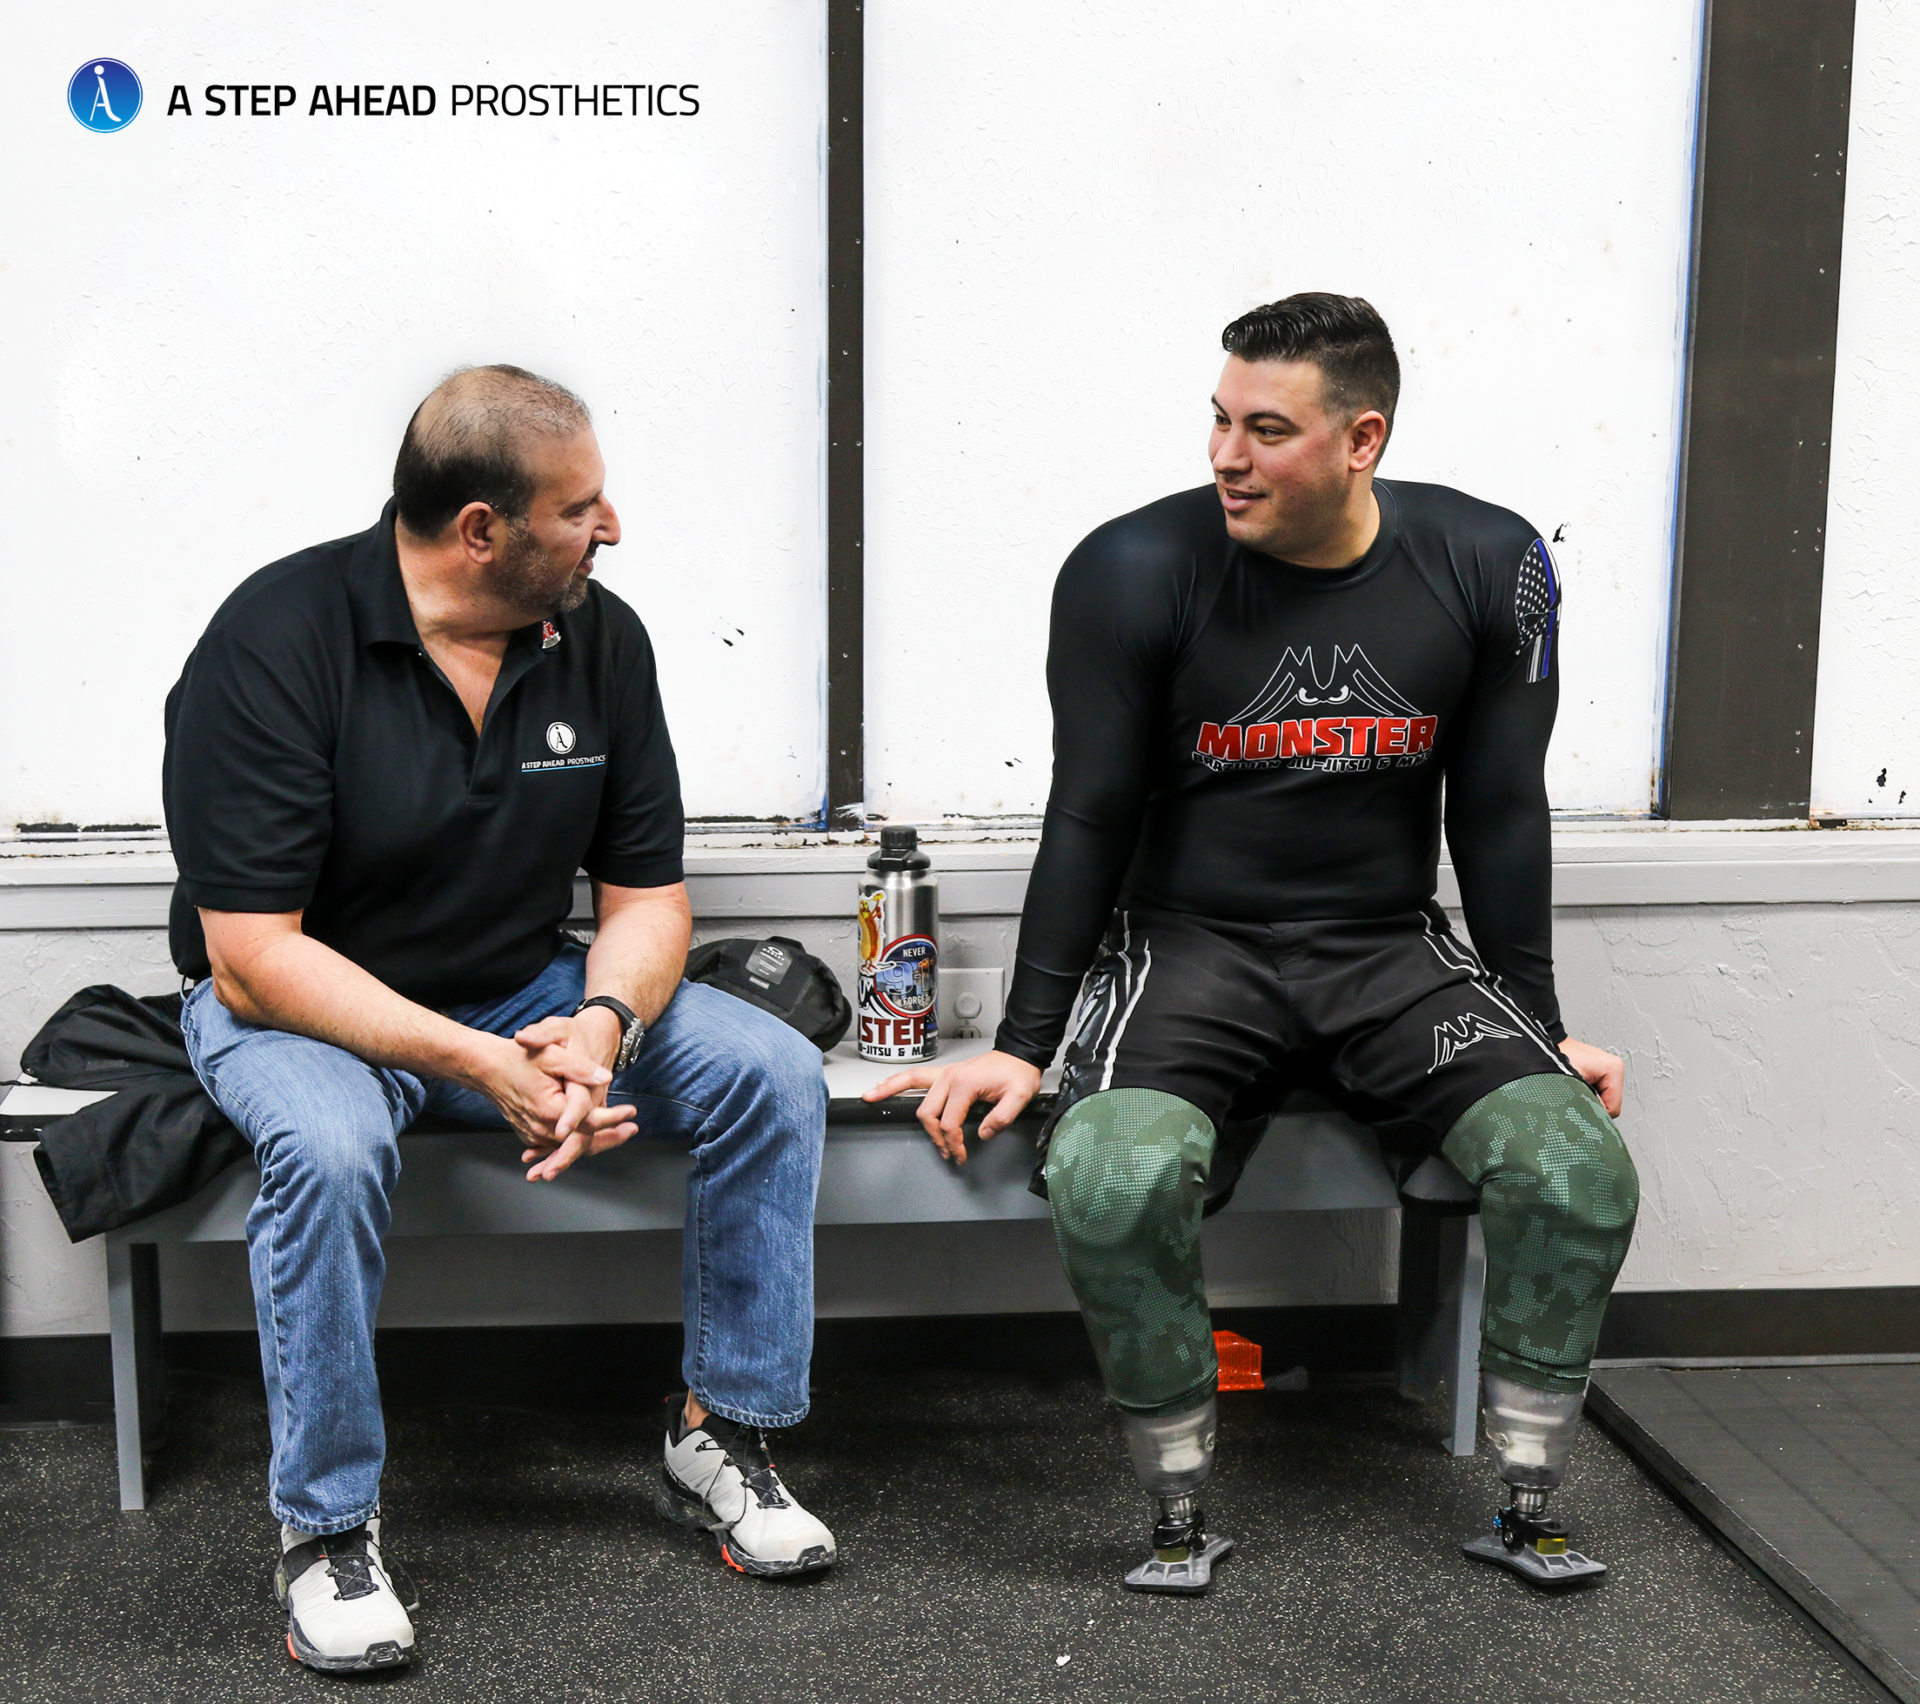 New York Prosthetics and Orthotics: Enhancing Lives with Care